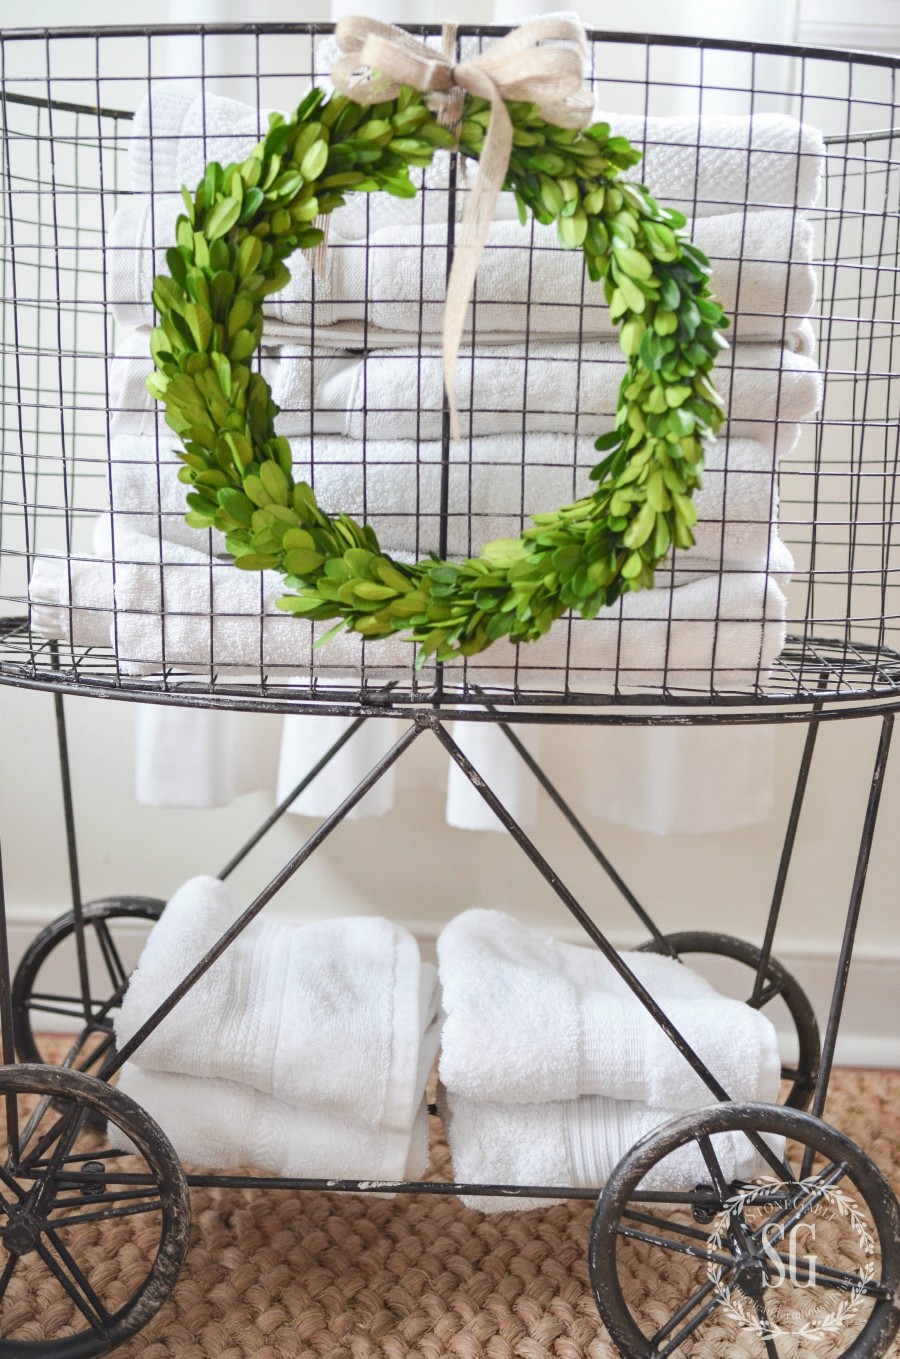 5 CREATIVE USES FOR A LAUNDRY BASKET ... practical and pretty!